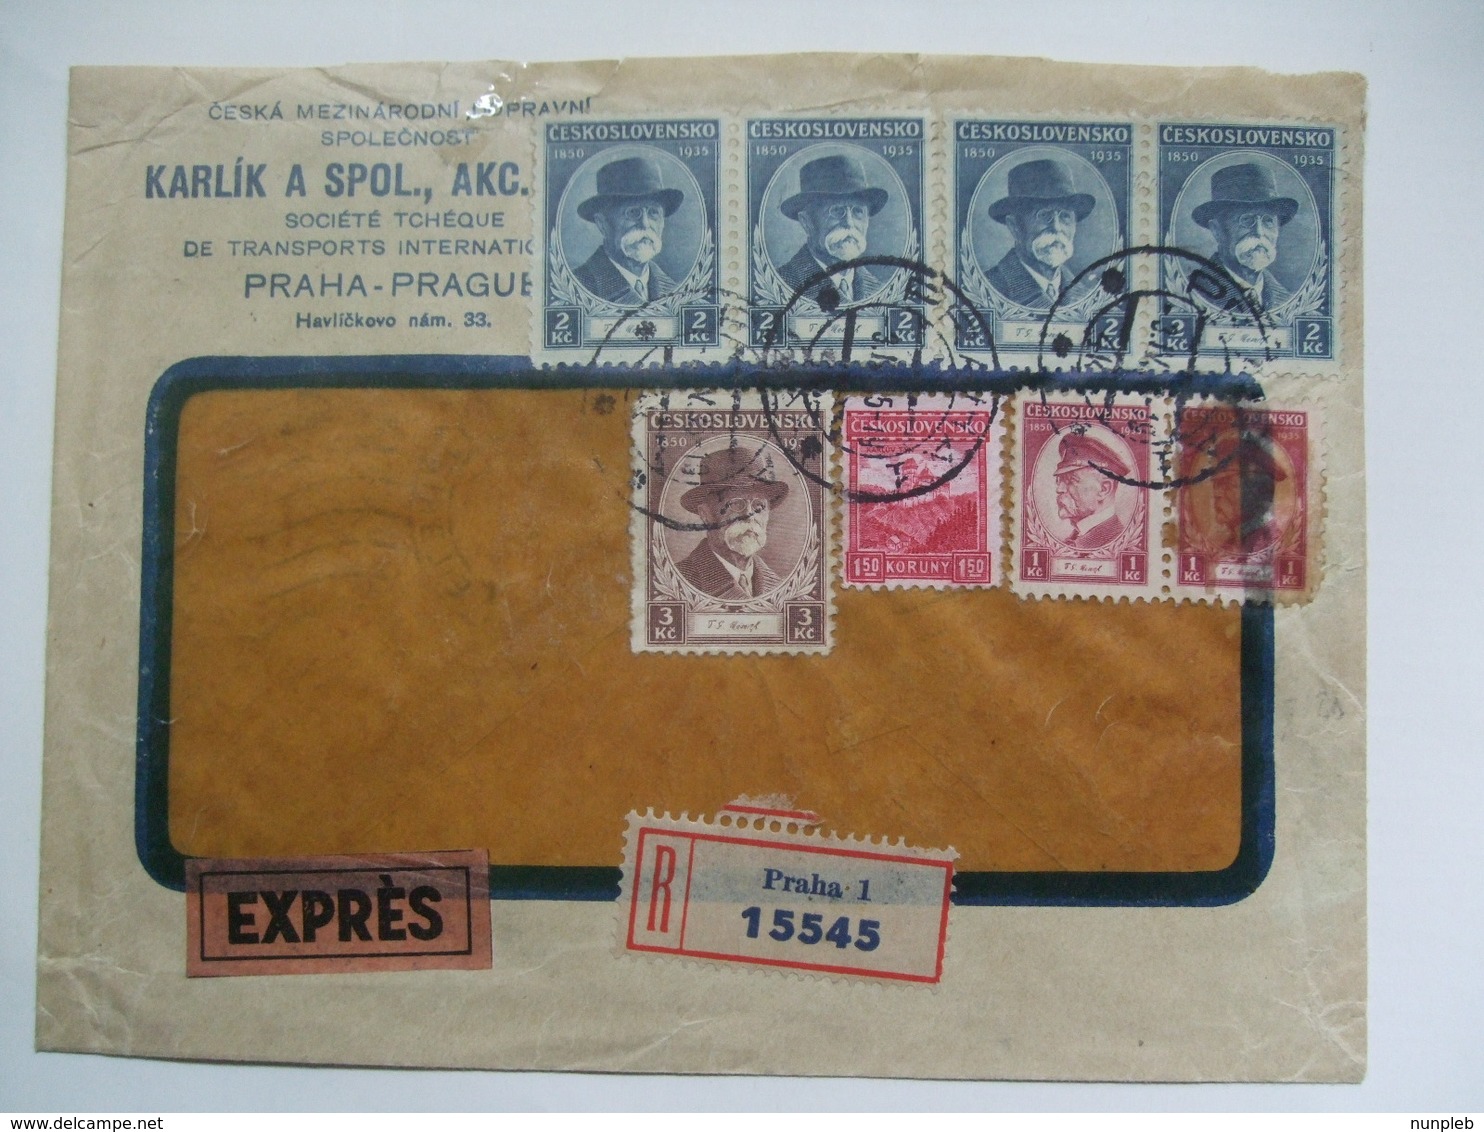 CZECHOSLOVAKIA 1935 Cover Prague To Hamburg Germany - Express And Registered (Eingegangen) - Multi-stamped - Covers & Documents